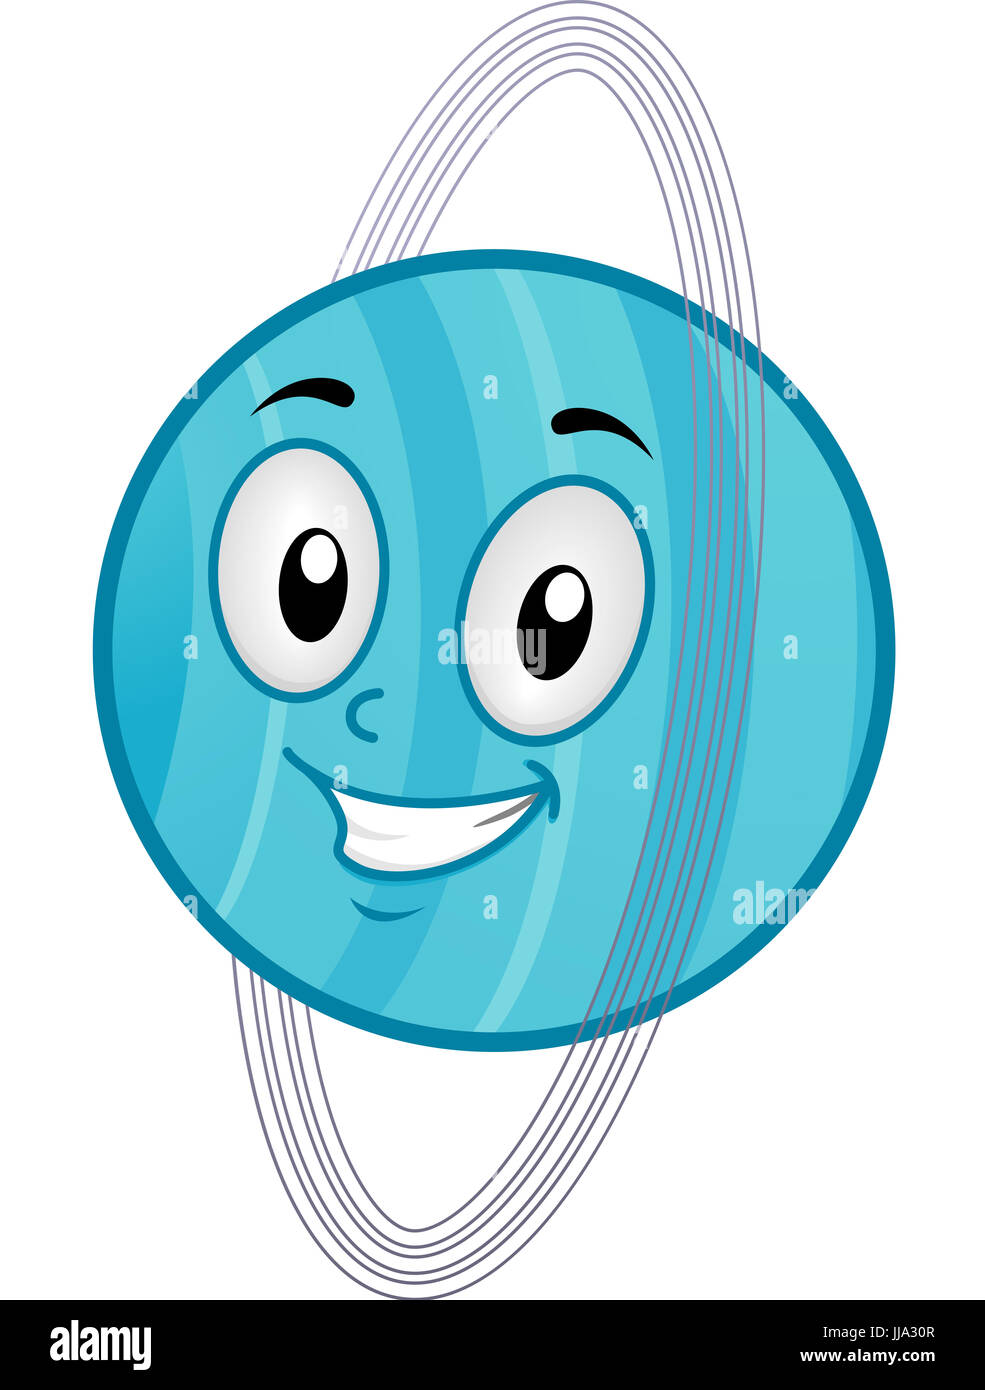 Illustration of a Uranus Mascot Featuring a Smiling Blue Planet Surrounded by Giant Rings Stock Photo